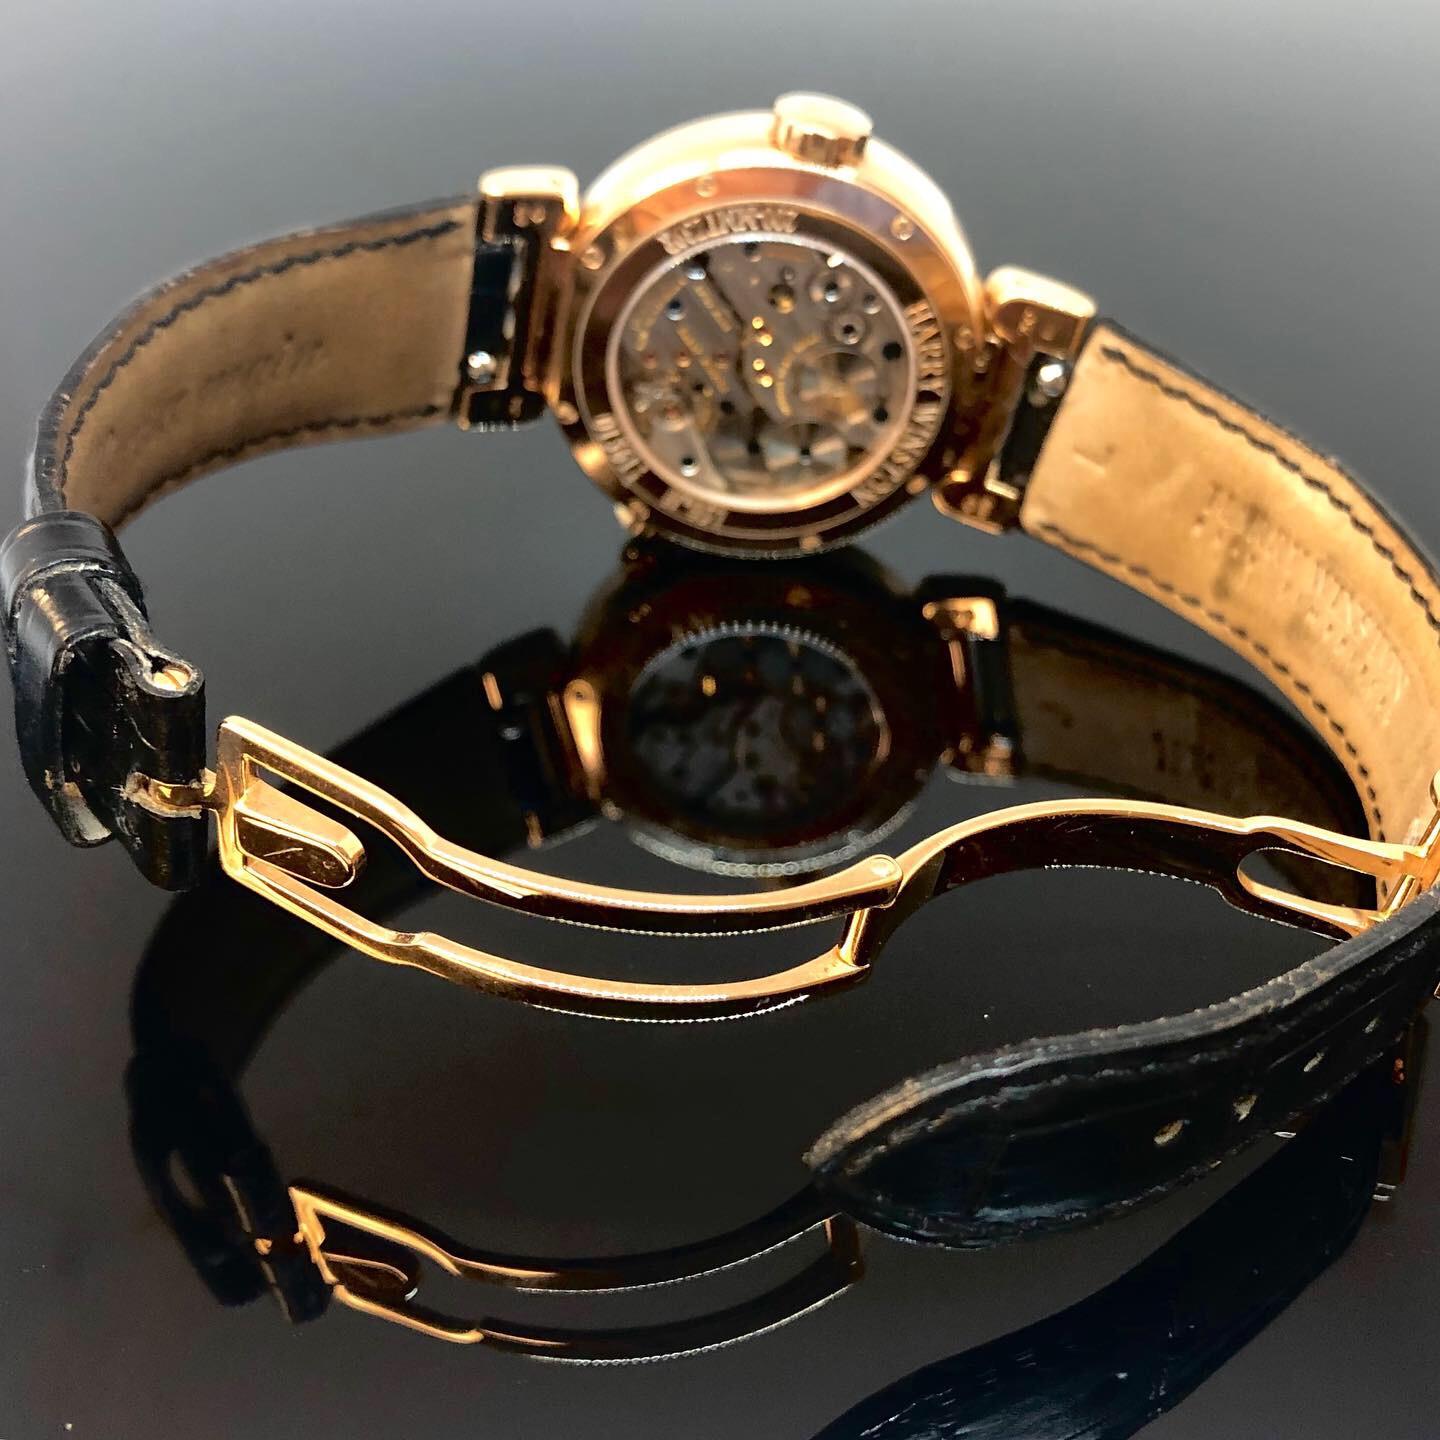 Harry Winston Premier Excenter Timezone 015619 Rose Gold Moonphase Watch 2